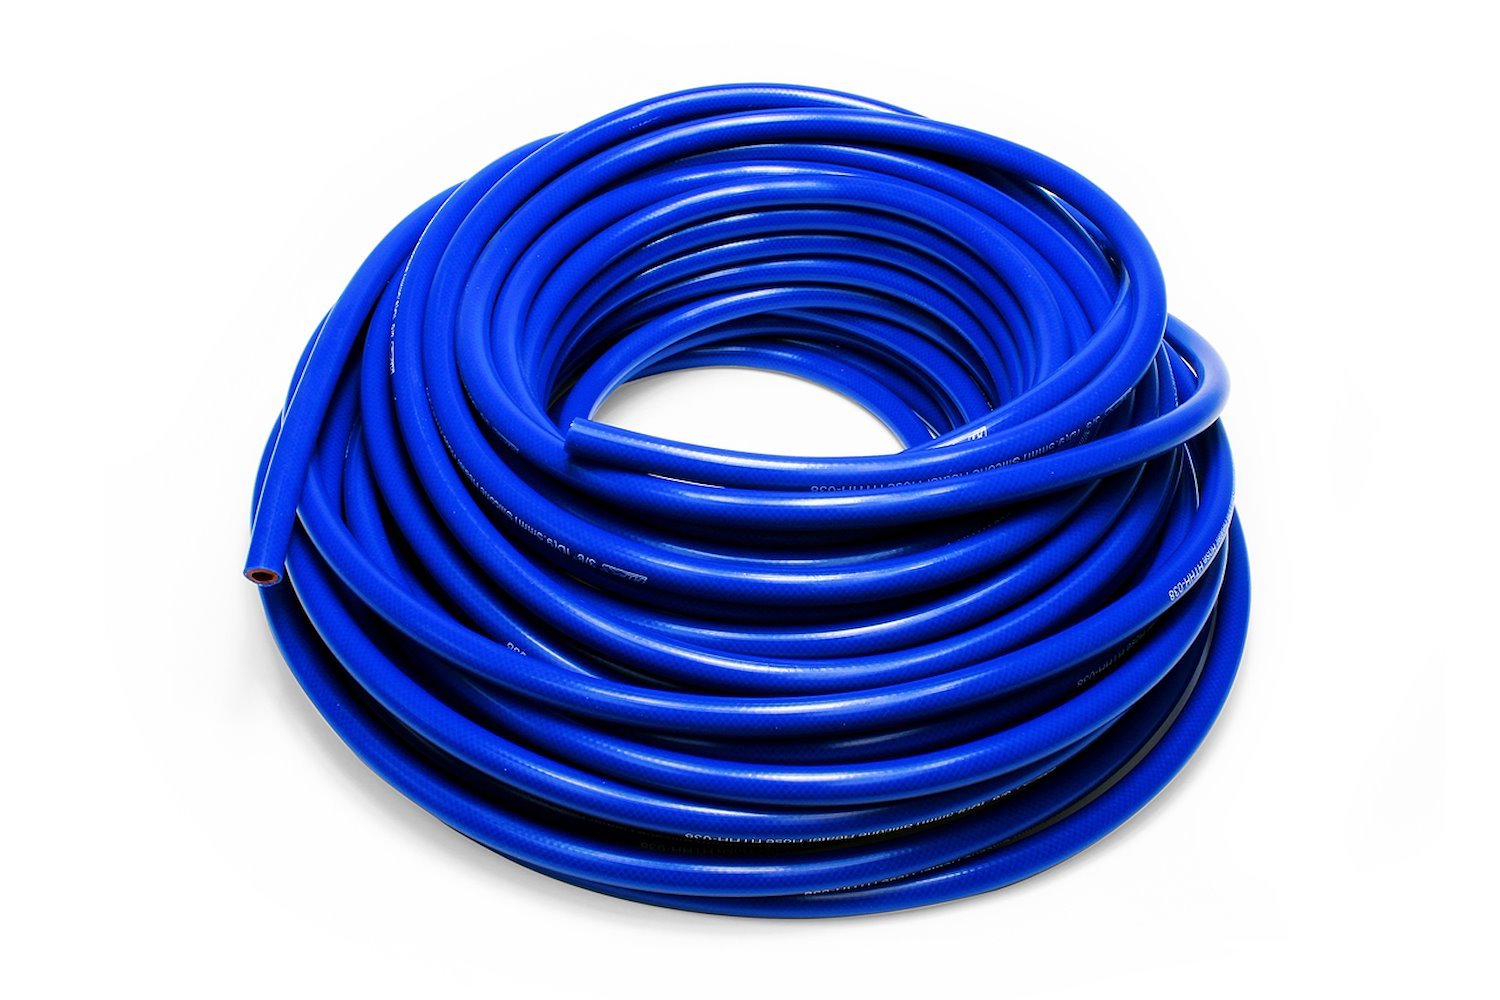 HTHH-075-BLUEx50 Silicone Heater Hose Tubing, High-Temp 1-Ply Reinforced, 3/4 in. ID, 50 ft. Roll, Blue